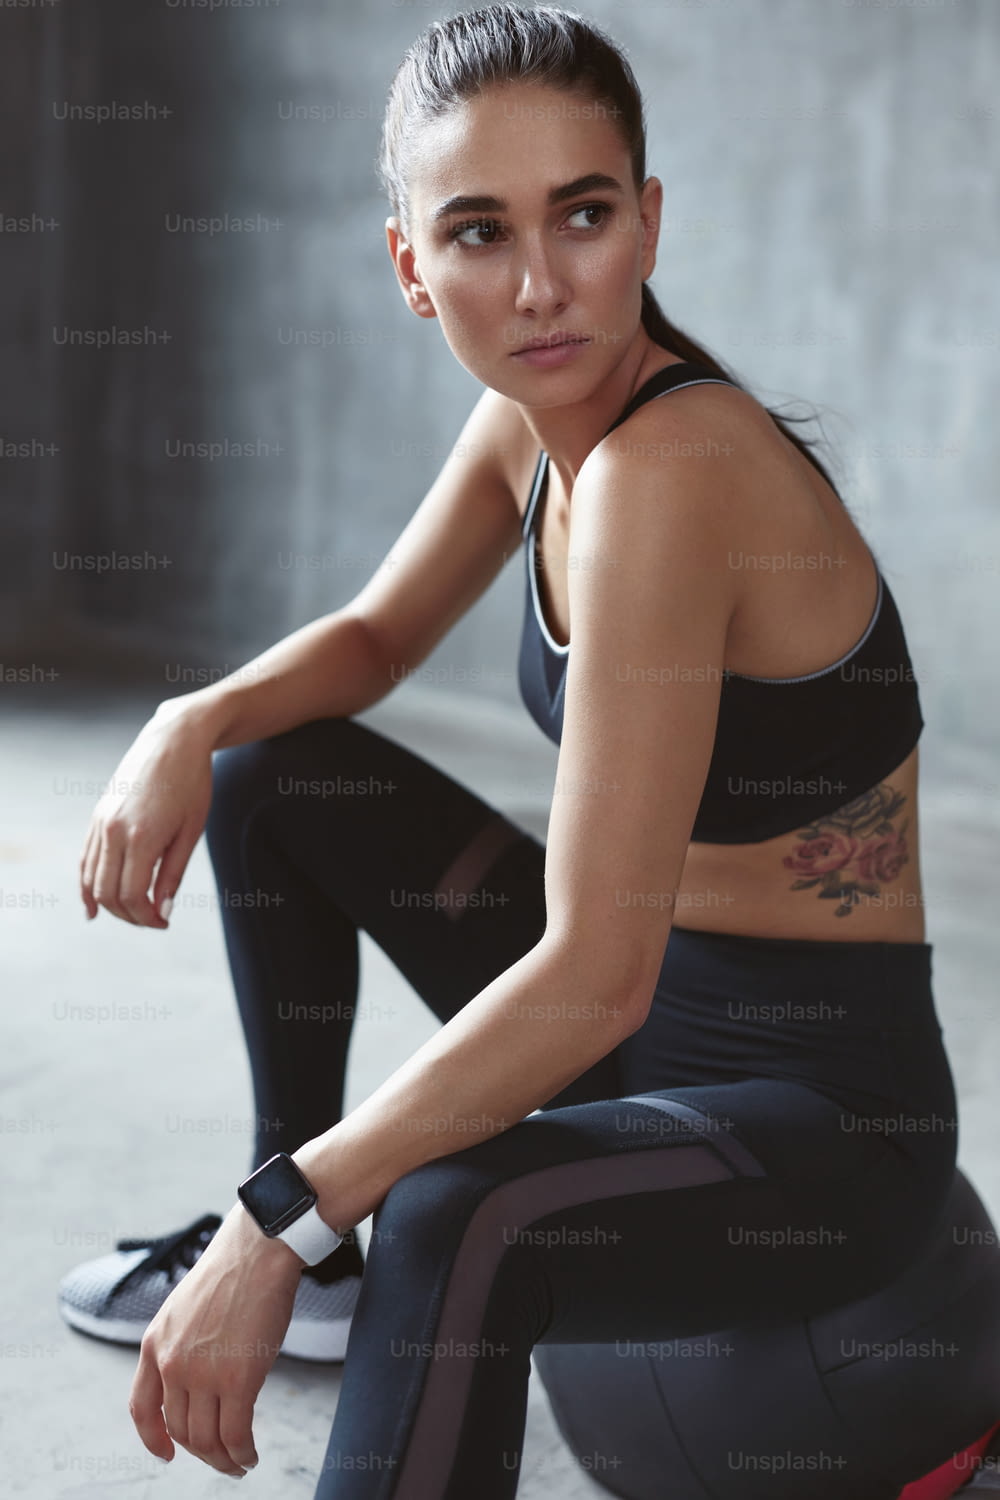 Fitness Woman In Fashion Sportswear Sitting On Med Ball After Sport Training Portrait. High Resolution